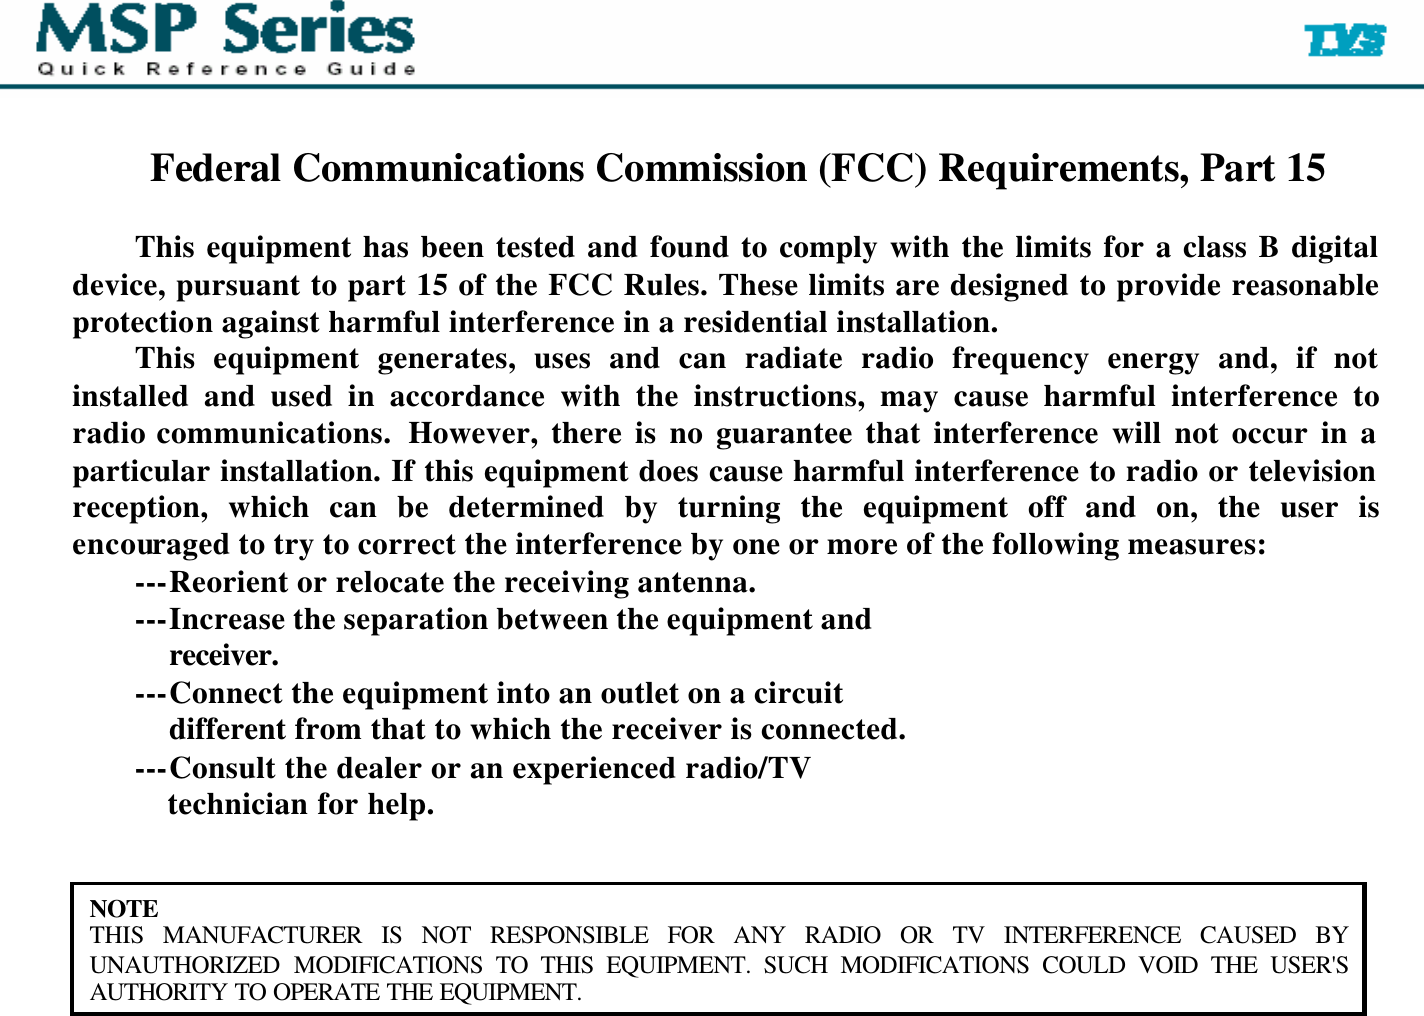   Federal Communications Commission (FCC) Requirements, Part 15  This equipment has been tested and found to comply with the limits for a class B digital device, pursuant to part 15 of the FCC Rules. These limits are designed to provide reasonable protection against harmful interference in a residential installation. This equipment generates, uses and can radiate radio frequency energy and, if not installed and used in accordance with the instructions, may cause harmful interference to radio communications.  However, there is no guarantee that interference will not occur in a particular installation. If this equipment does cause harmful interference to radio or television reception, which can be determined by turning the equipment off and on, the user is encouraged to try to correct the interference by one or more of the following measures: ---Reorient or relocate the receiving antenna. ---Increase the separation between the equipment and         receiver. ---Connect the equipment into an outlet on a circuit         different from that to which the receiver is connected. ---Consult the dealer or an experienced radio/TV         technician for help.   NOTE THIS MANUFACTURER IS NOT RESPONSIBLE FOR ANY RADIO OR TV INTERFERENCE CAUSED BY UNAUTHORIZED MODIFICATIONS TO THIS EQUIPMENT. SUCH MODIFICATIONS COULD VOID THE USER&apos;S AUTHORITY TO OPERATE THE EQUIPMENT.  